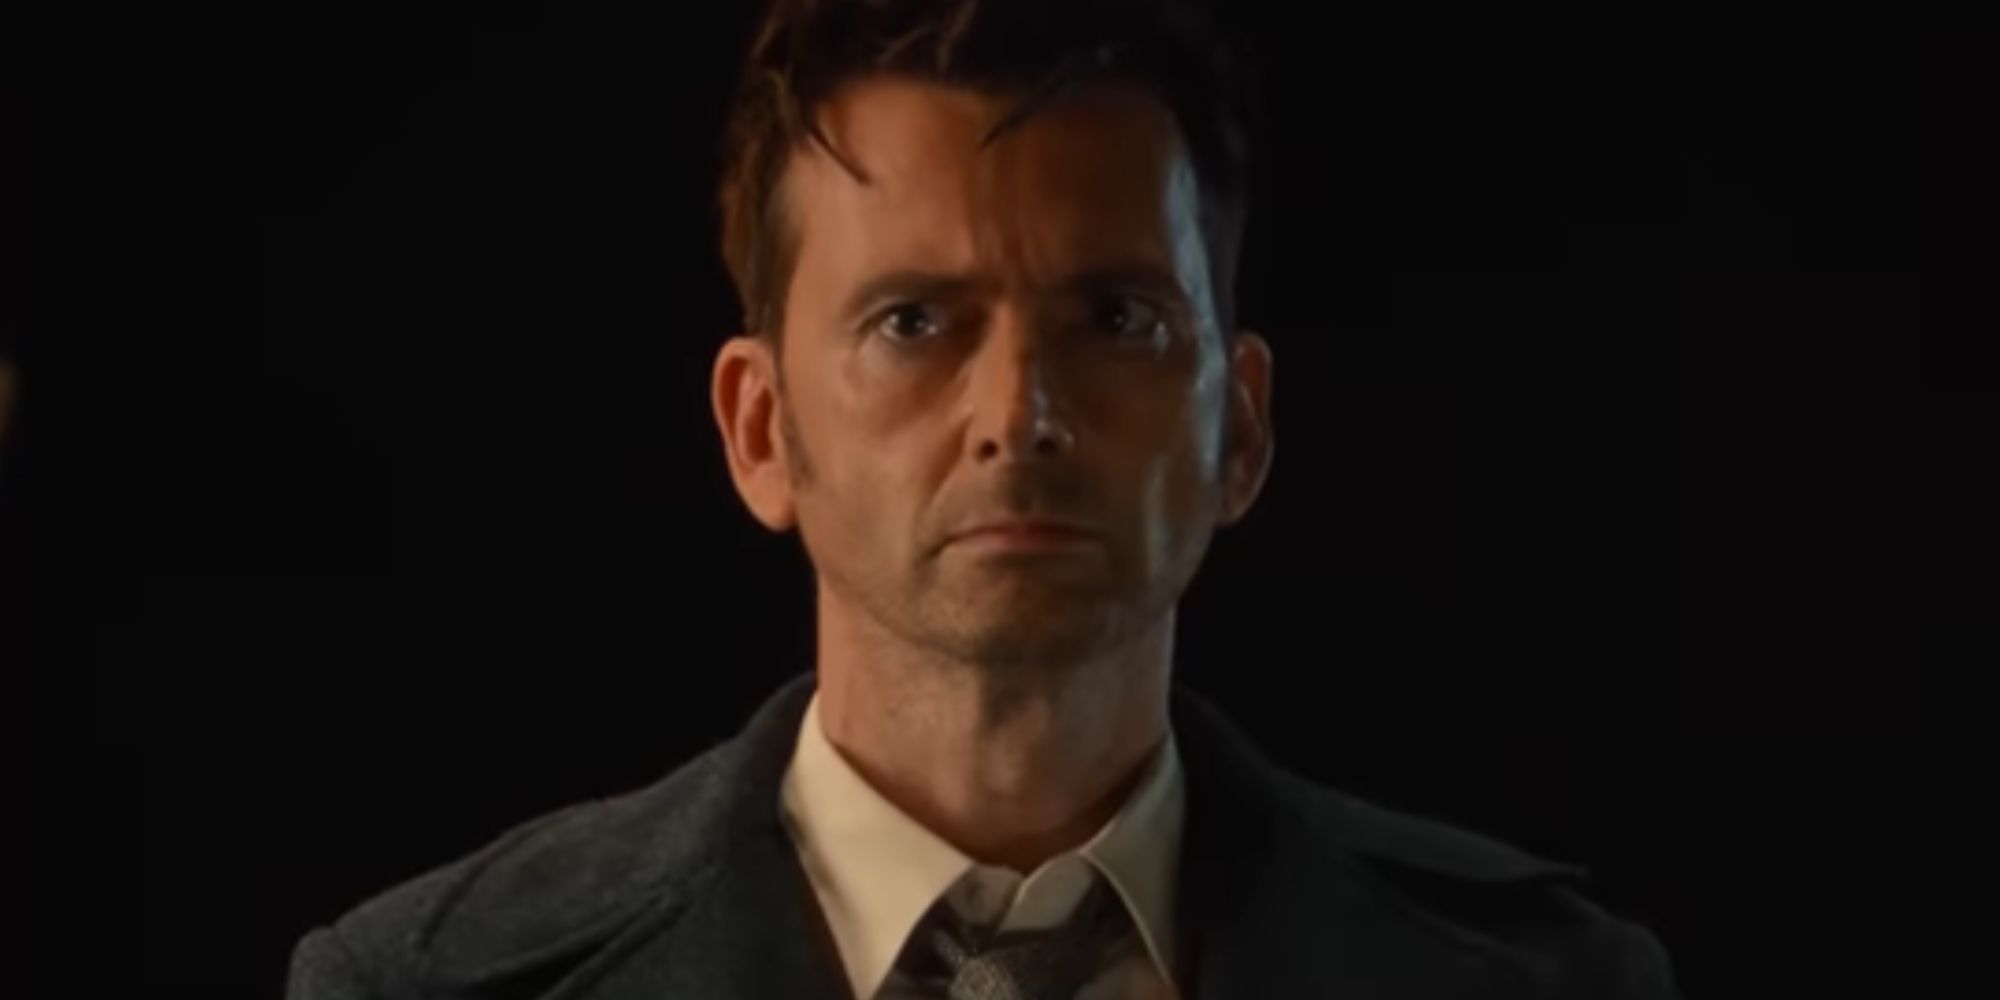 David Tennant looking stern as the Fourteenth Doctor in Doctor Who